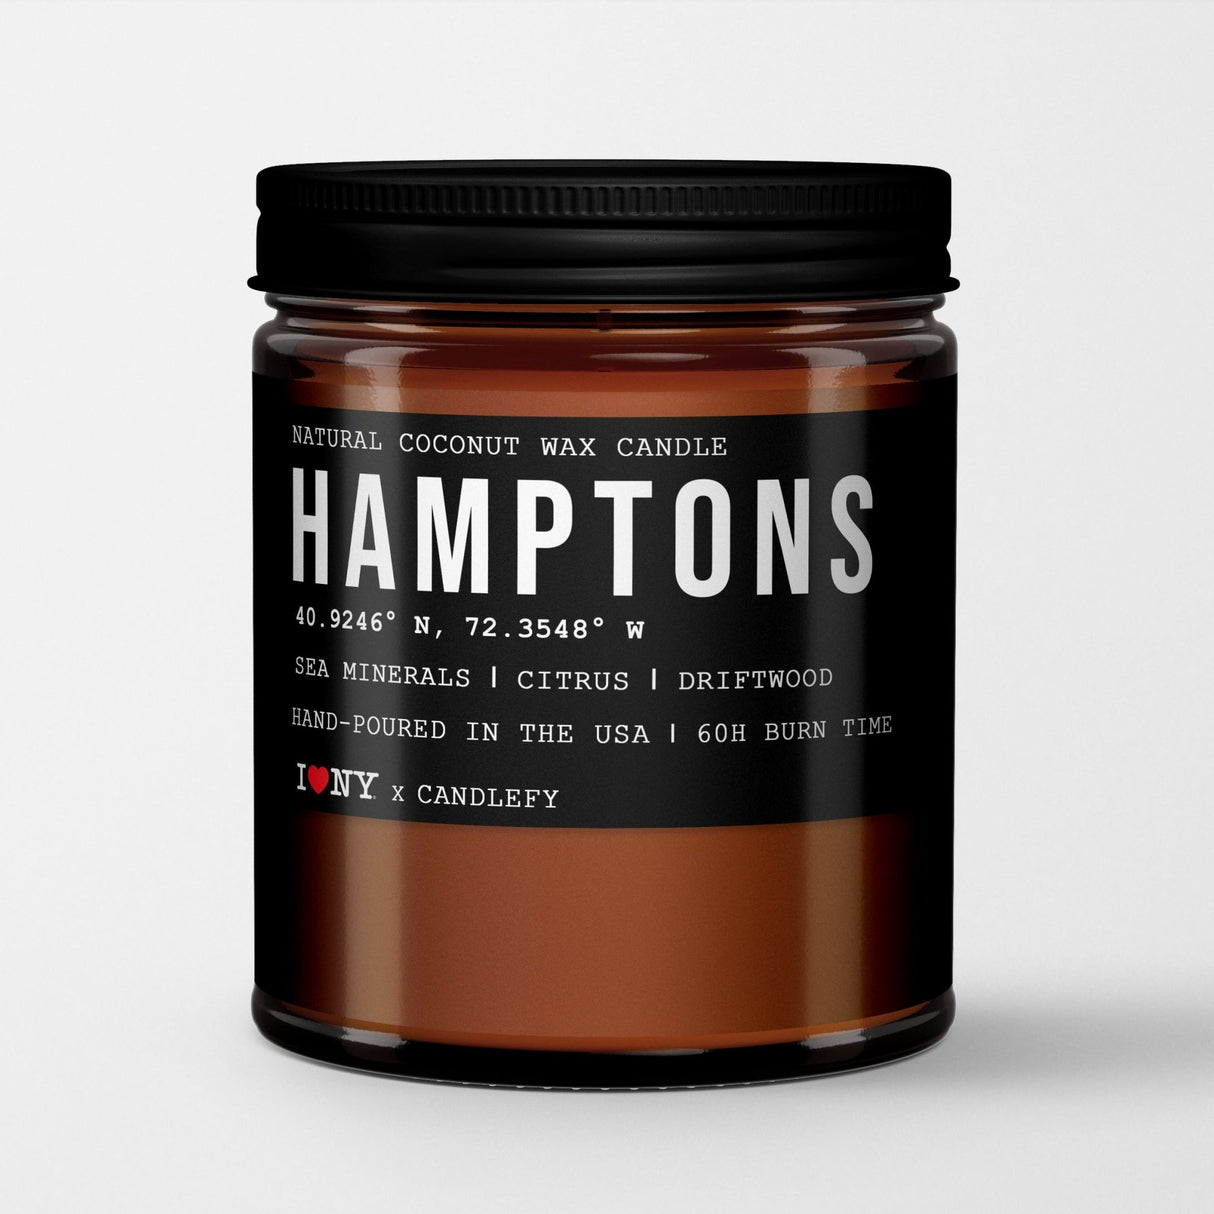 Hamptons: New York Scented Candle (Sea Mineral, Citrus, Amberwood) - Candlefy